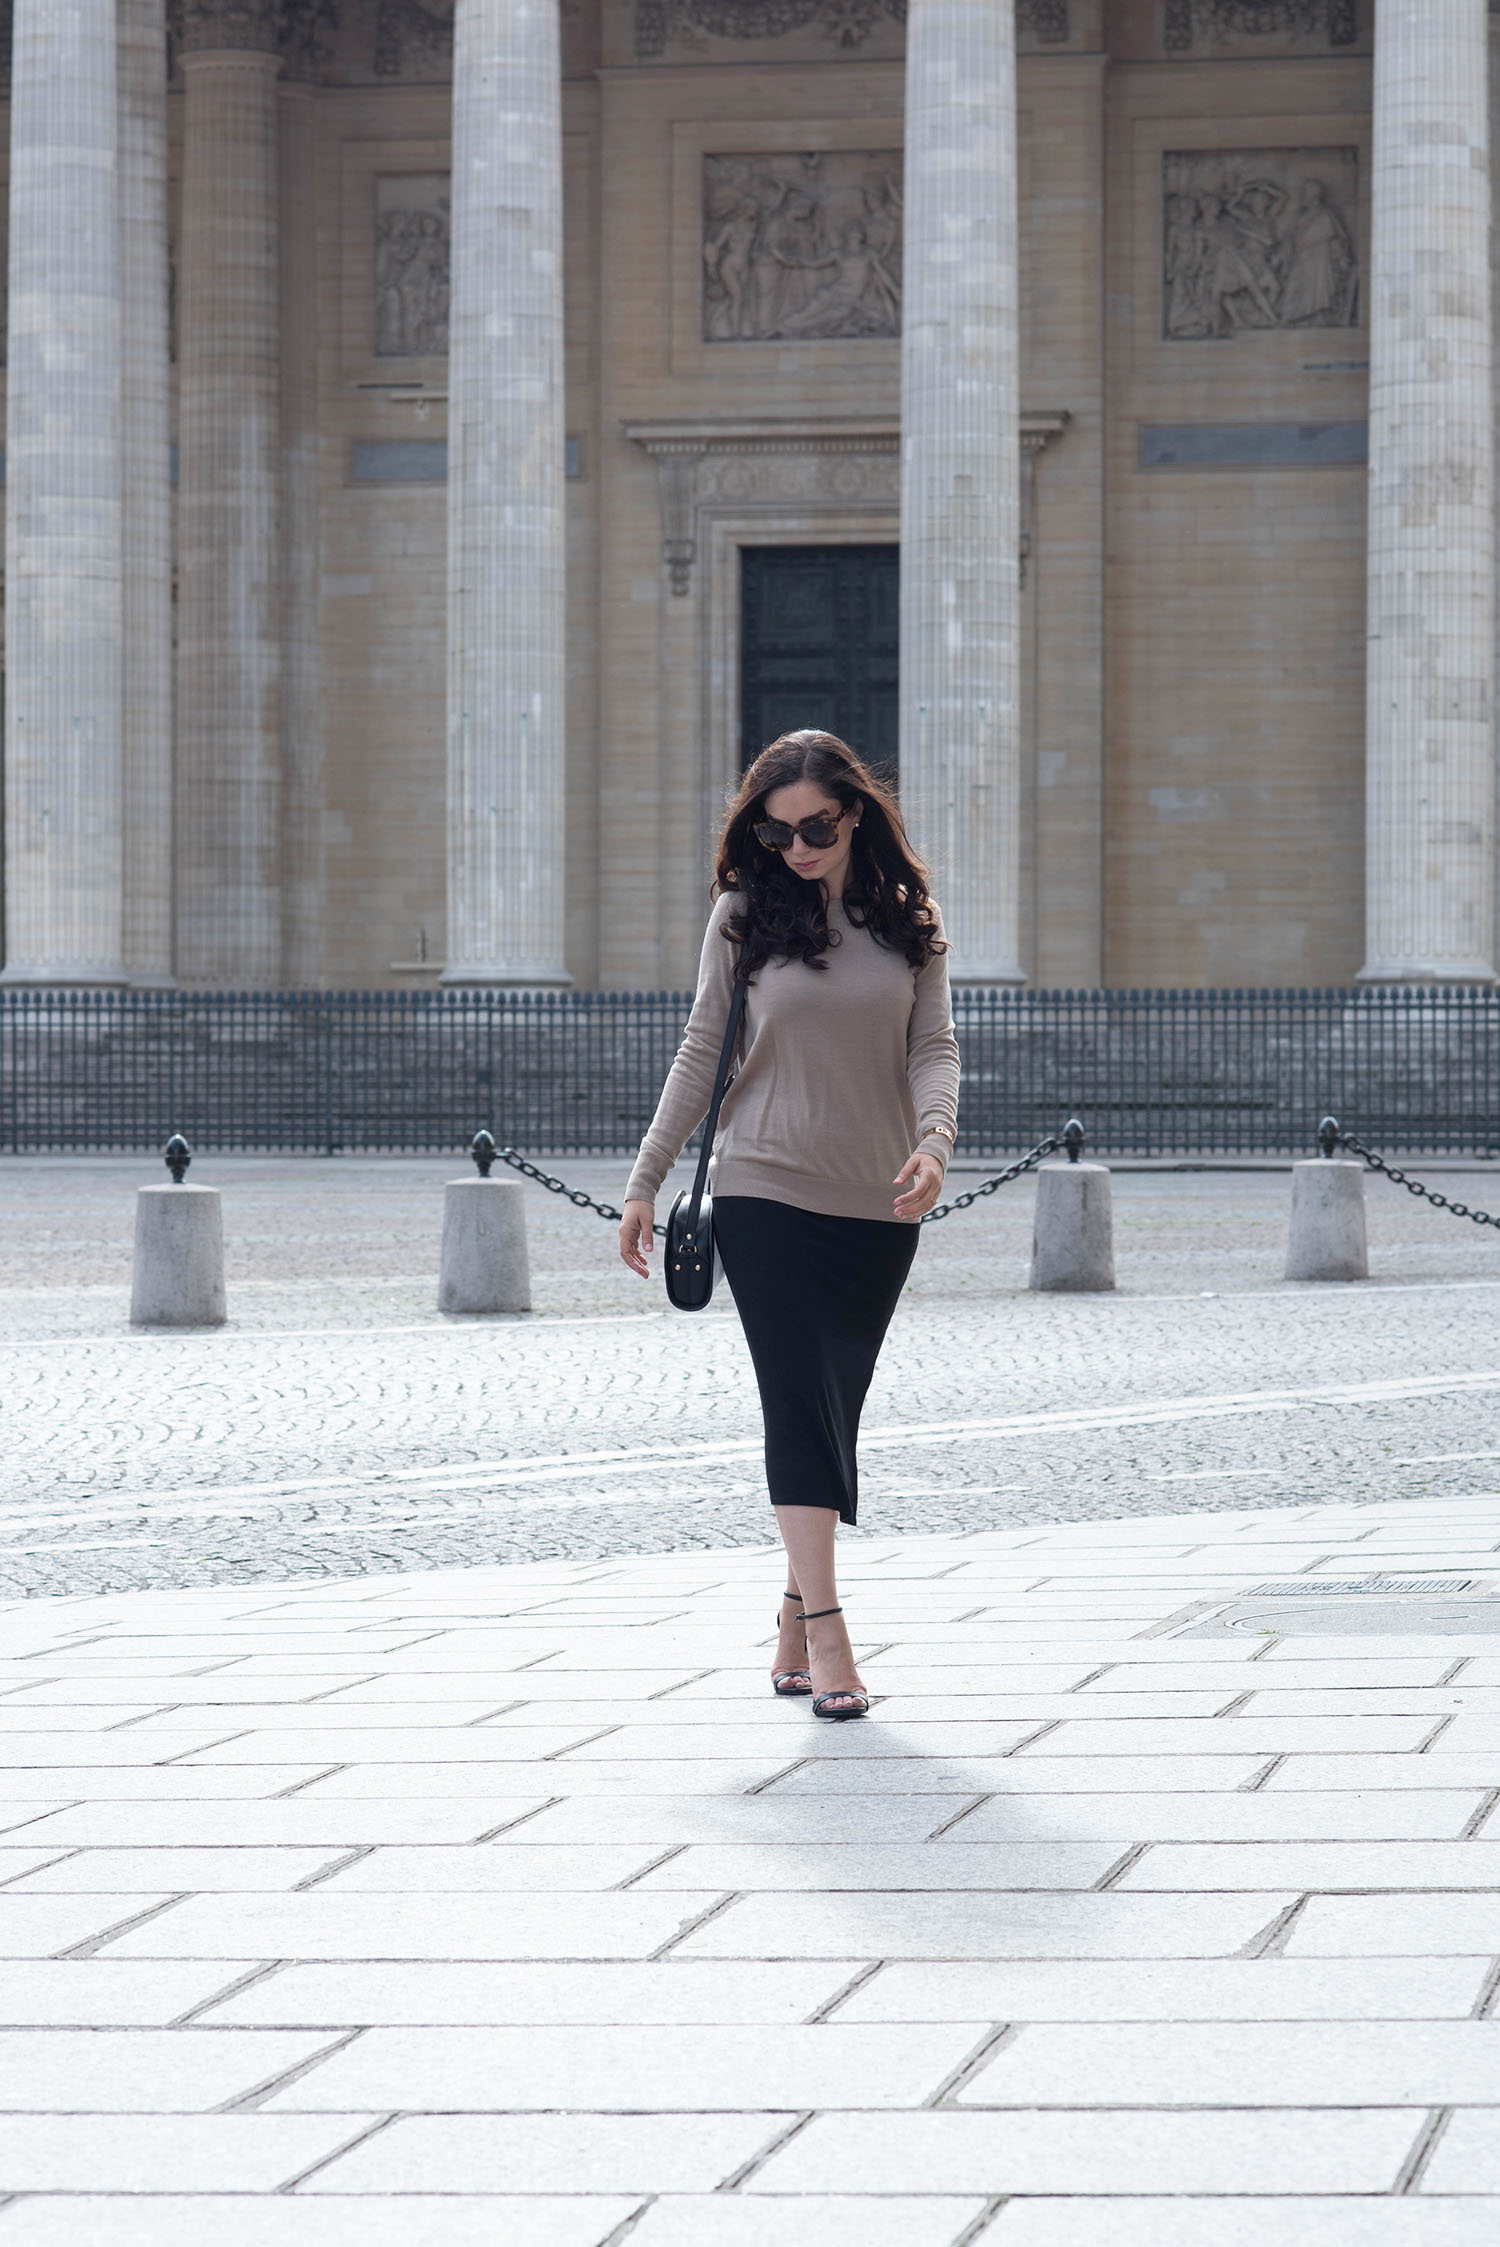 Fashion blogger Cee Fardoe of Coco & Vera walks away from the Pantheon in Paris wearing a Privacy Please dress and carrying an APC halfmoon bag